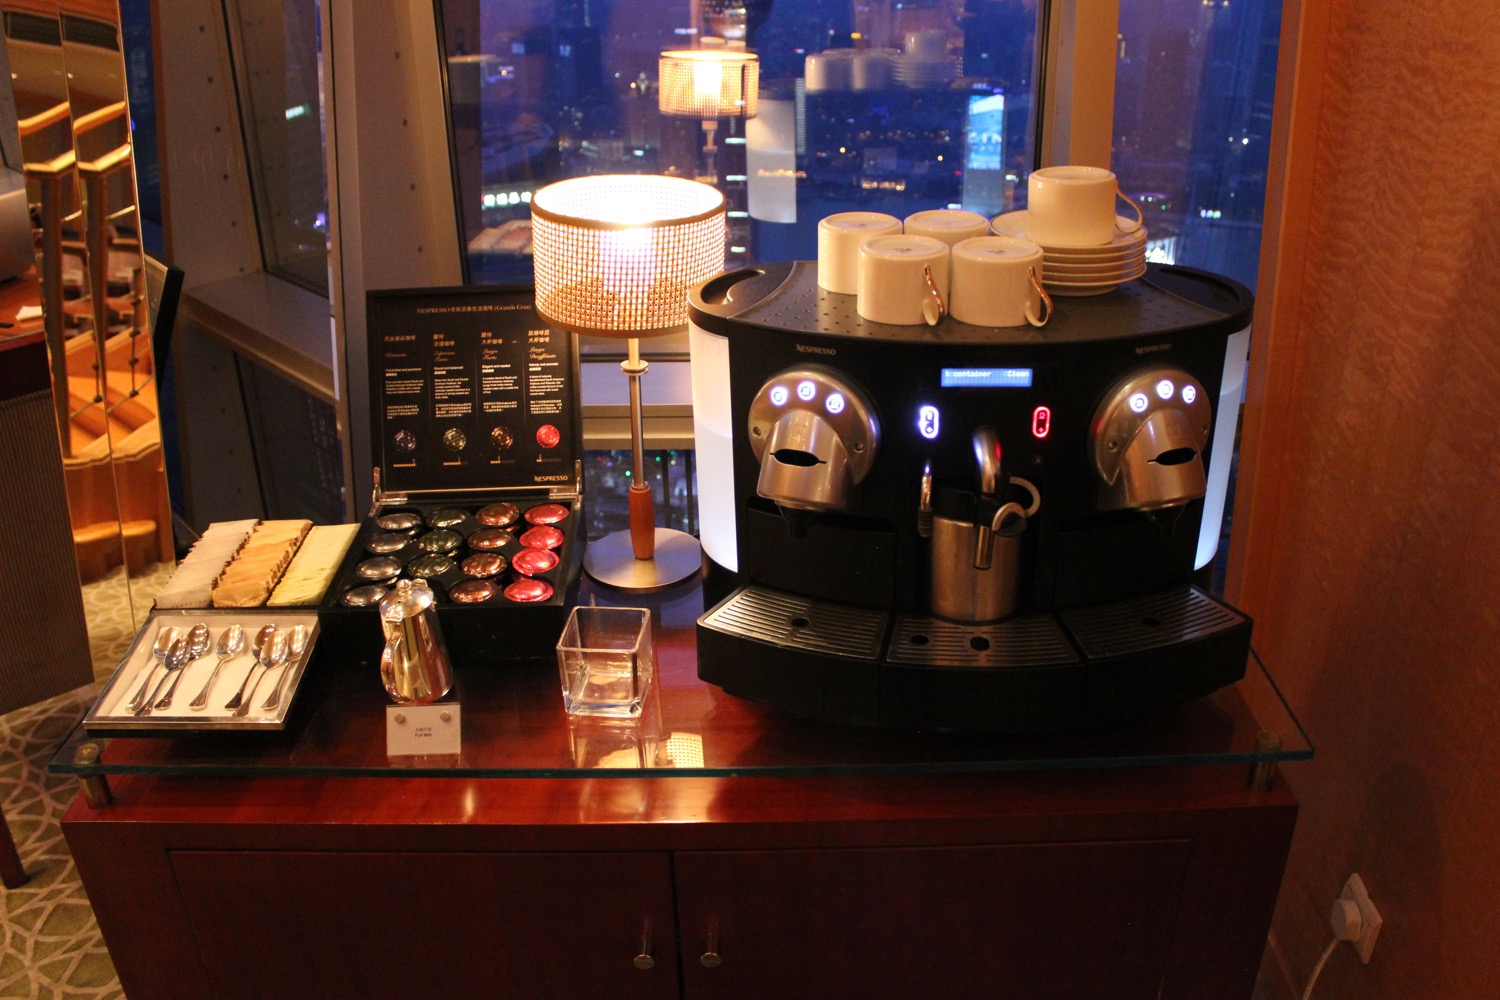 a coffee machine with cups and plates on a table